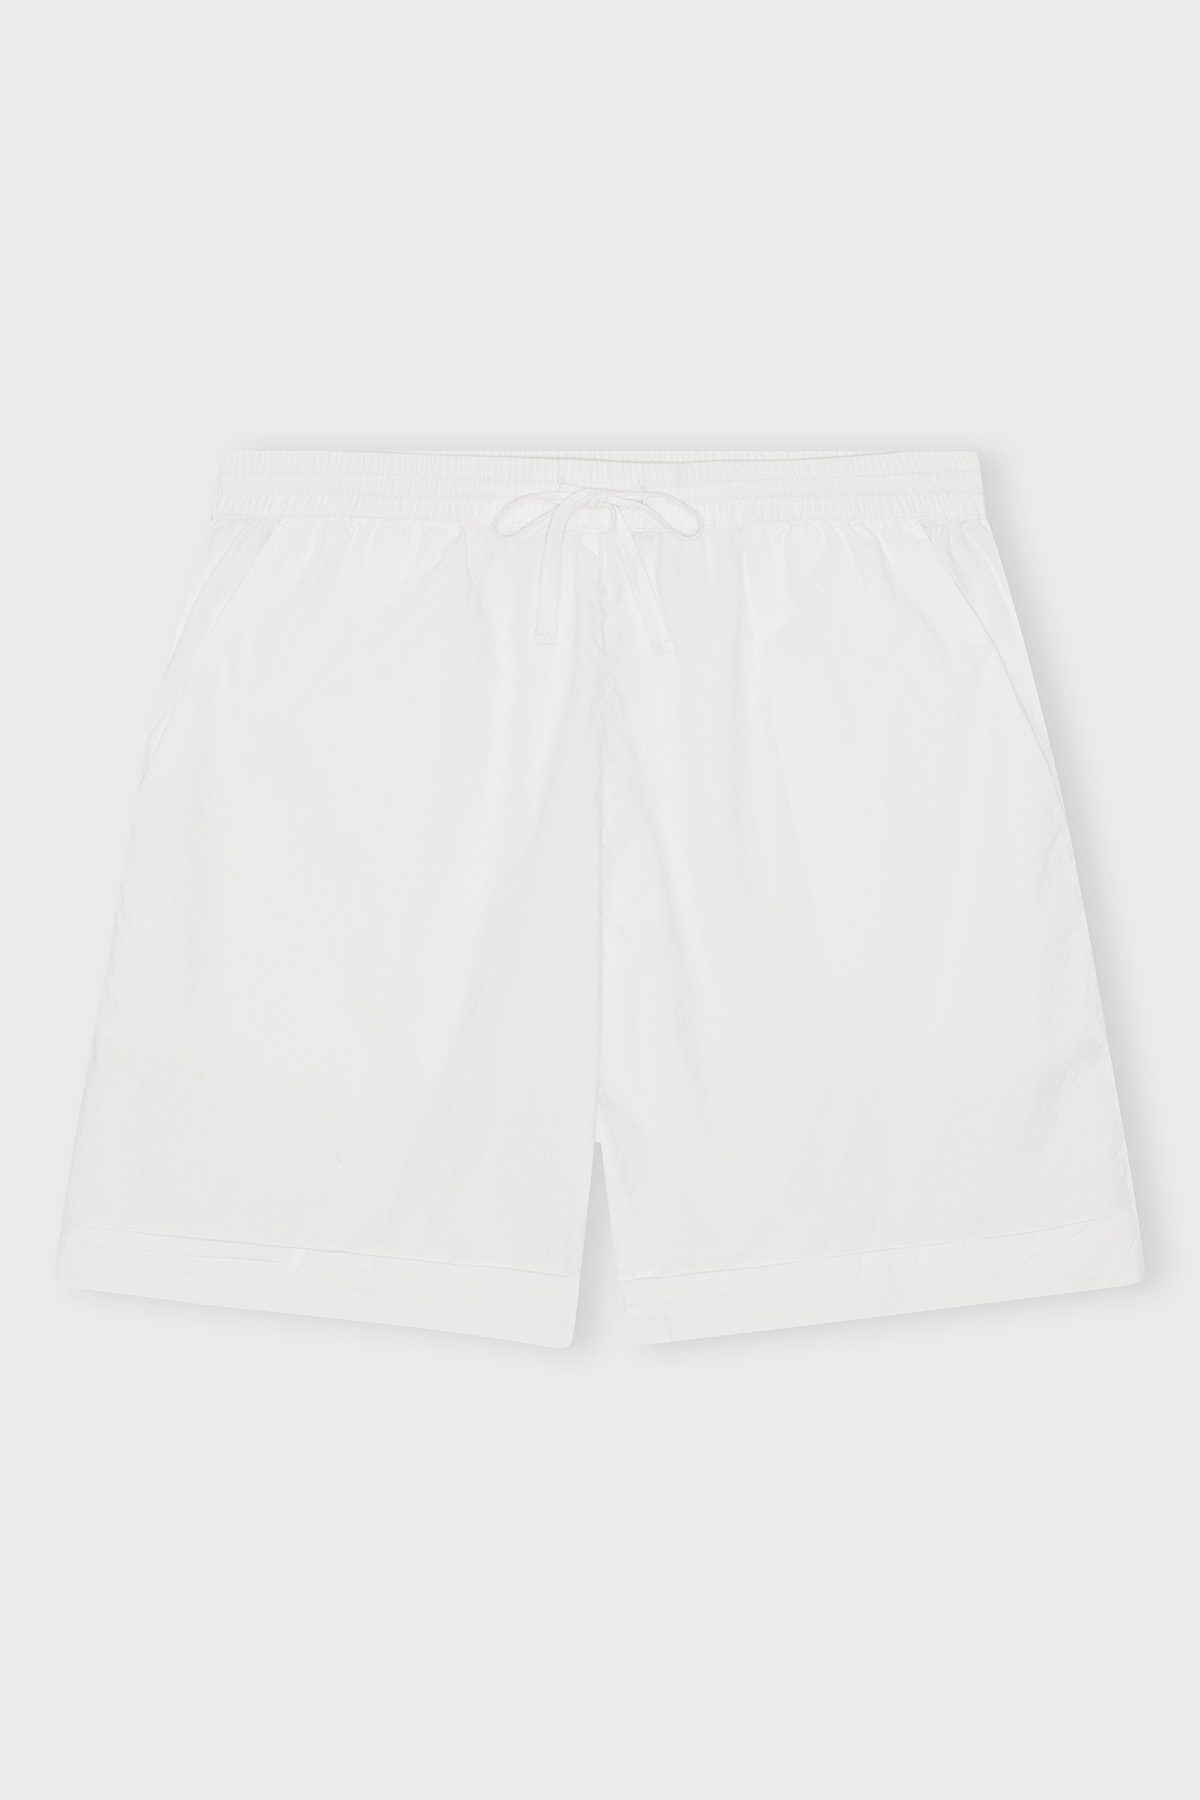 Shorts “Laura” fra Care By Me – Pure White